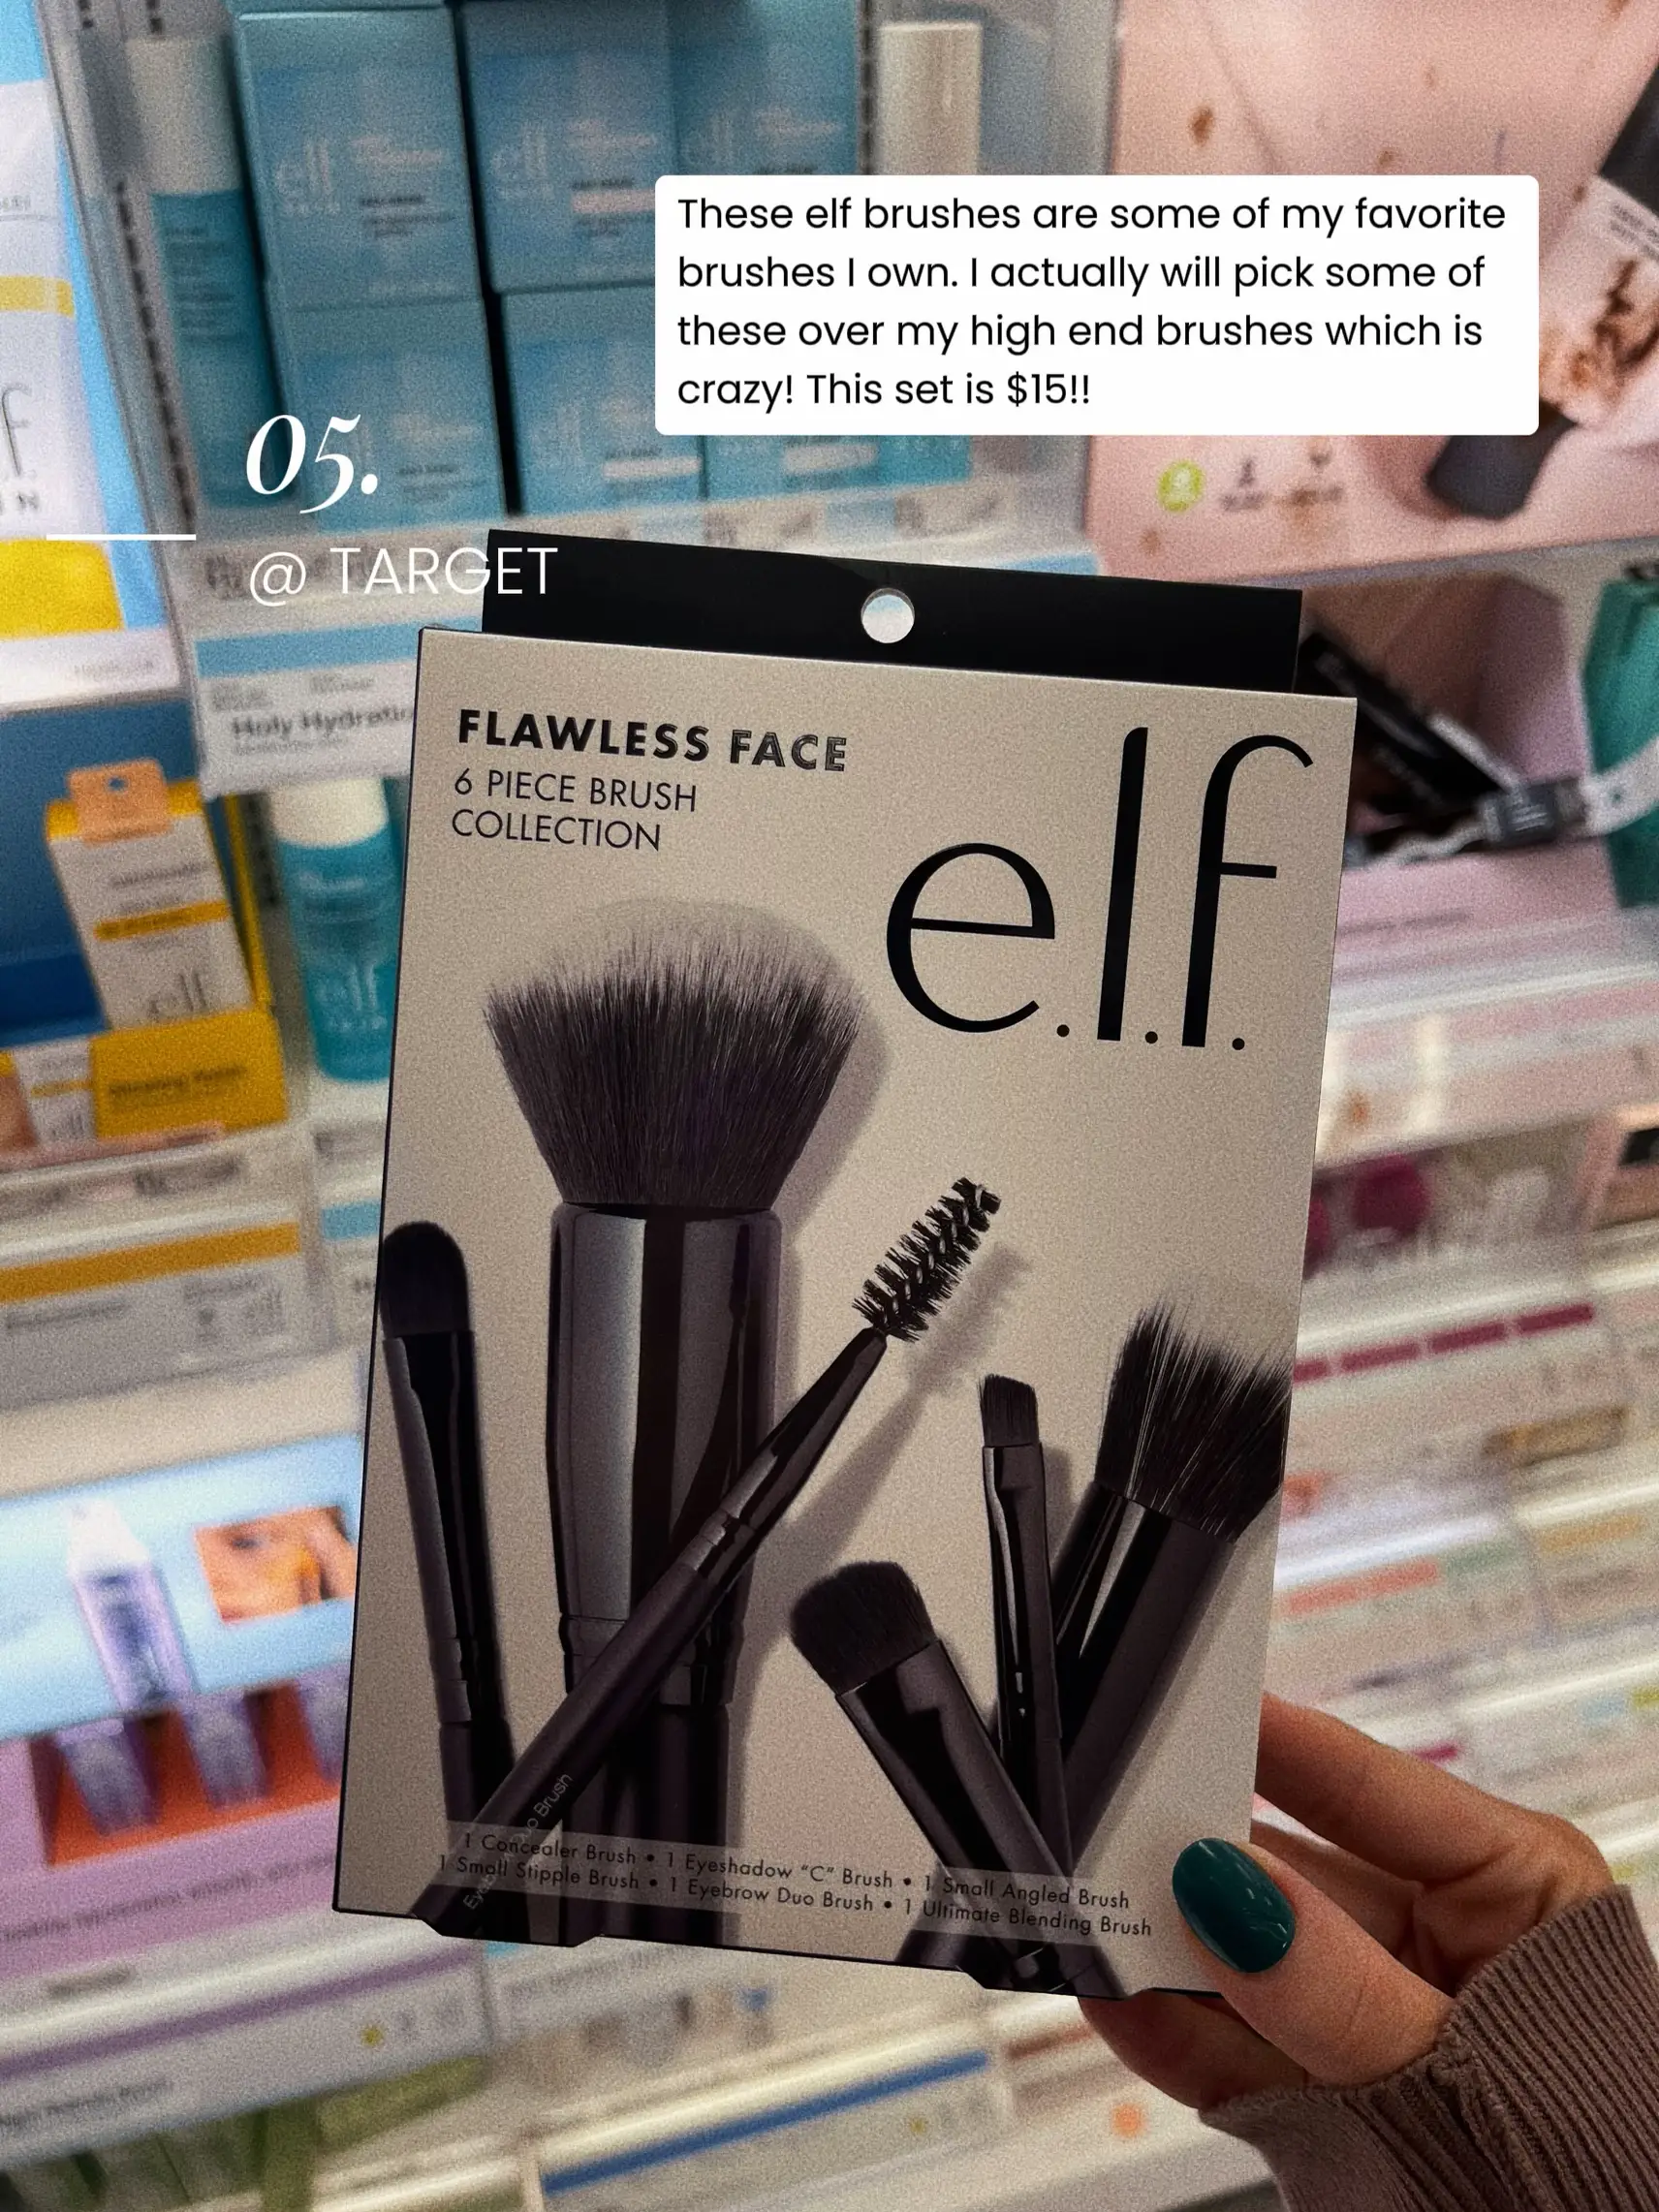  A person is holding a set of elf brush